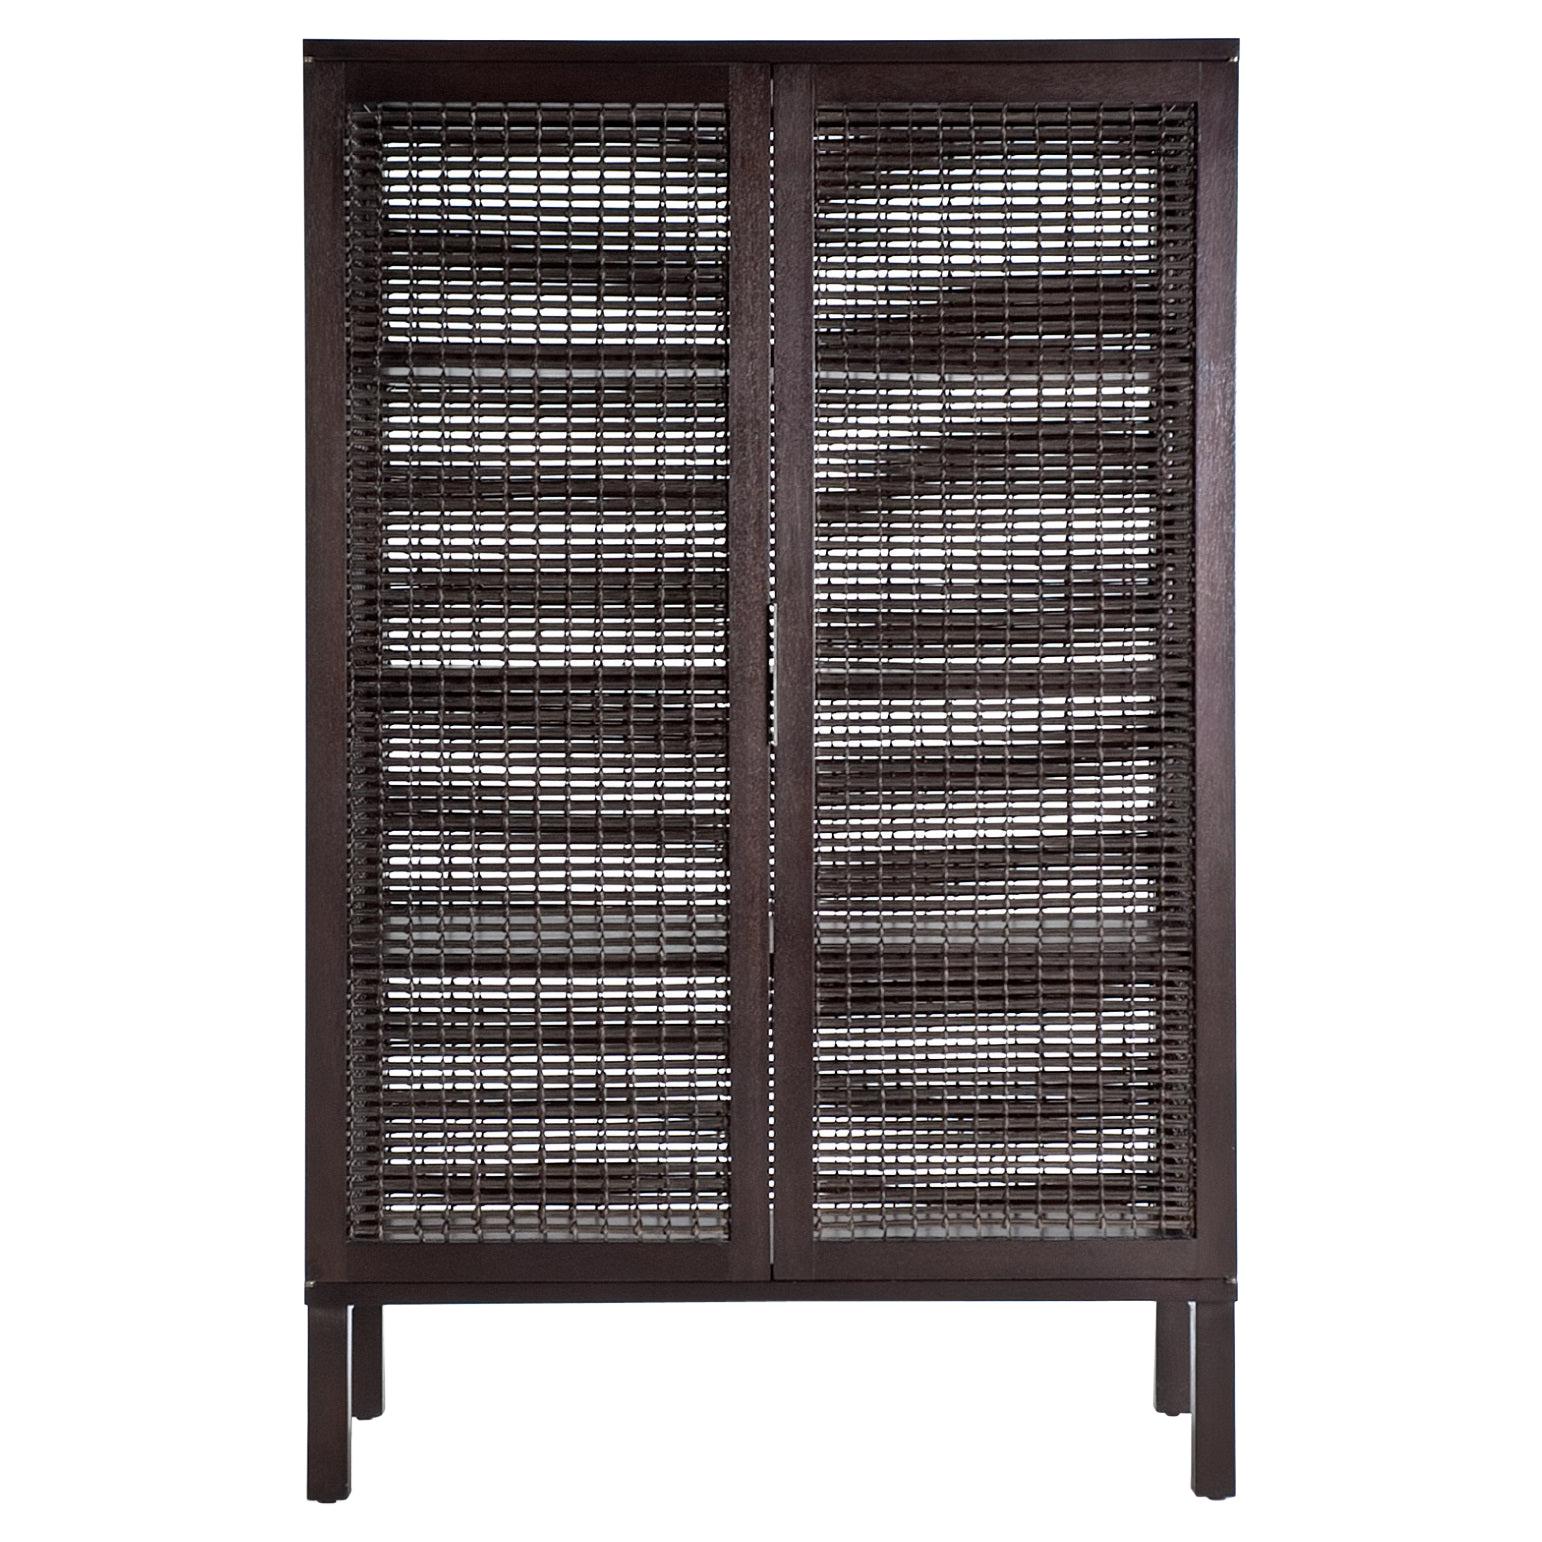 Walnut Suzy Wong Cabinet by Kenneth Cobonpue